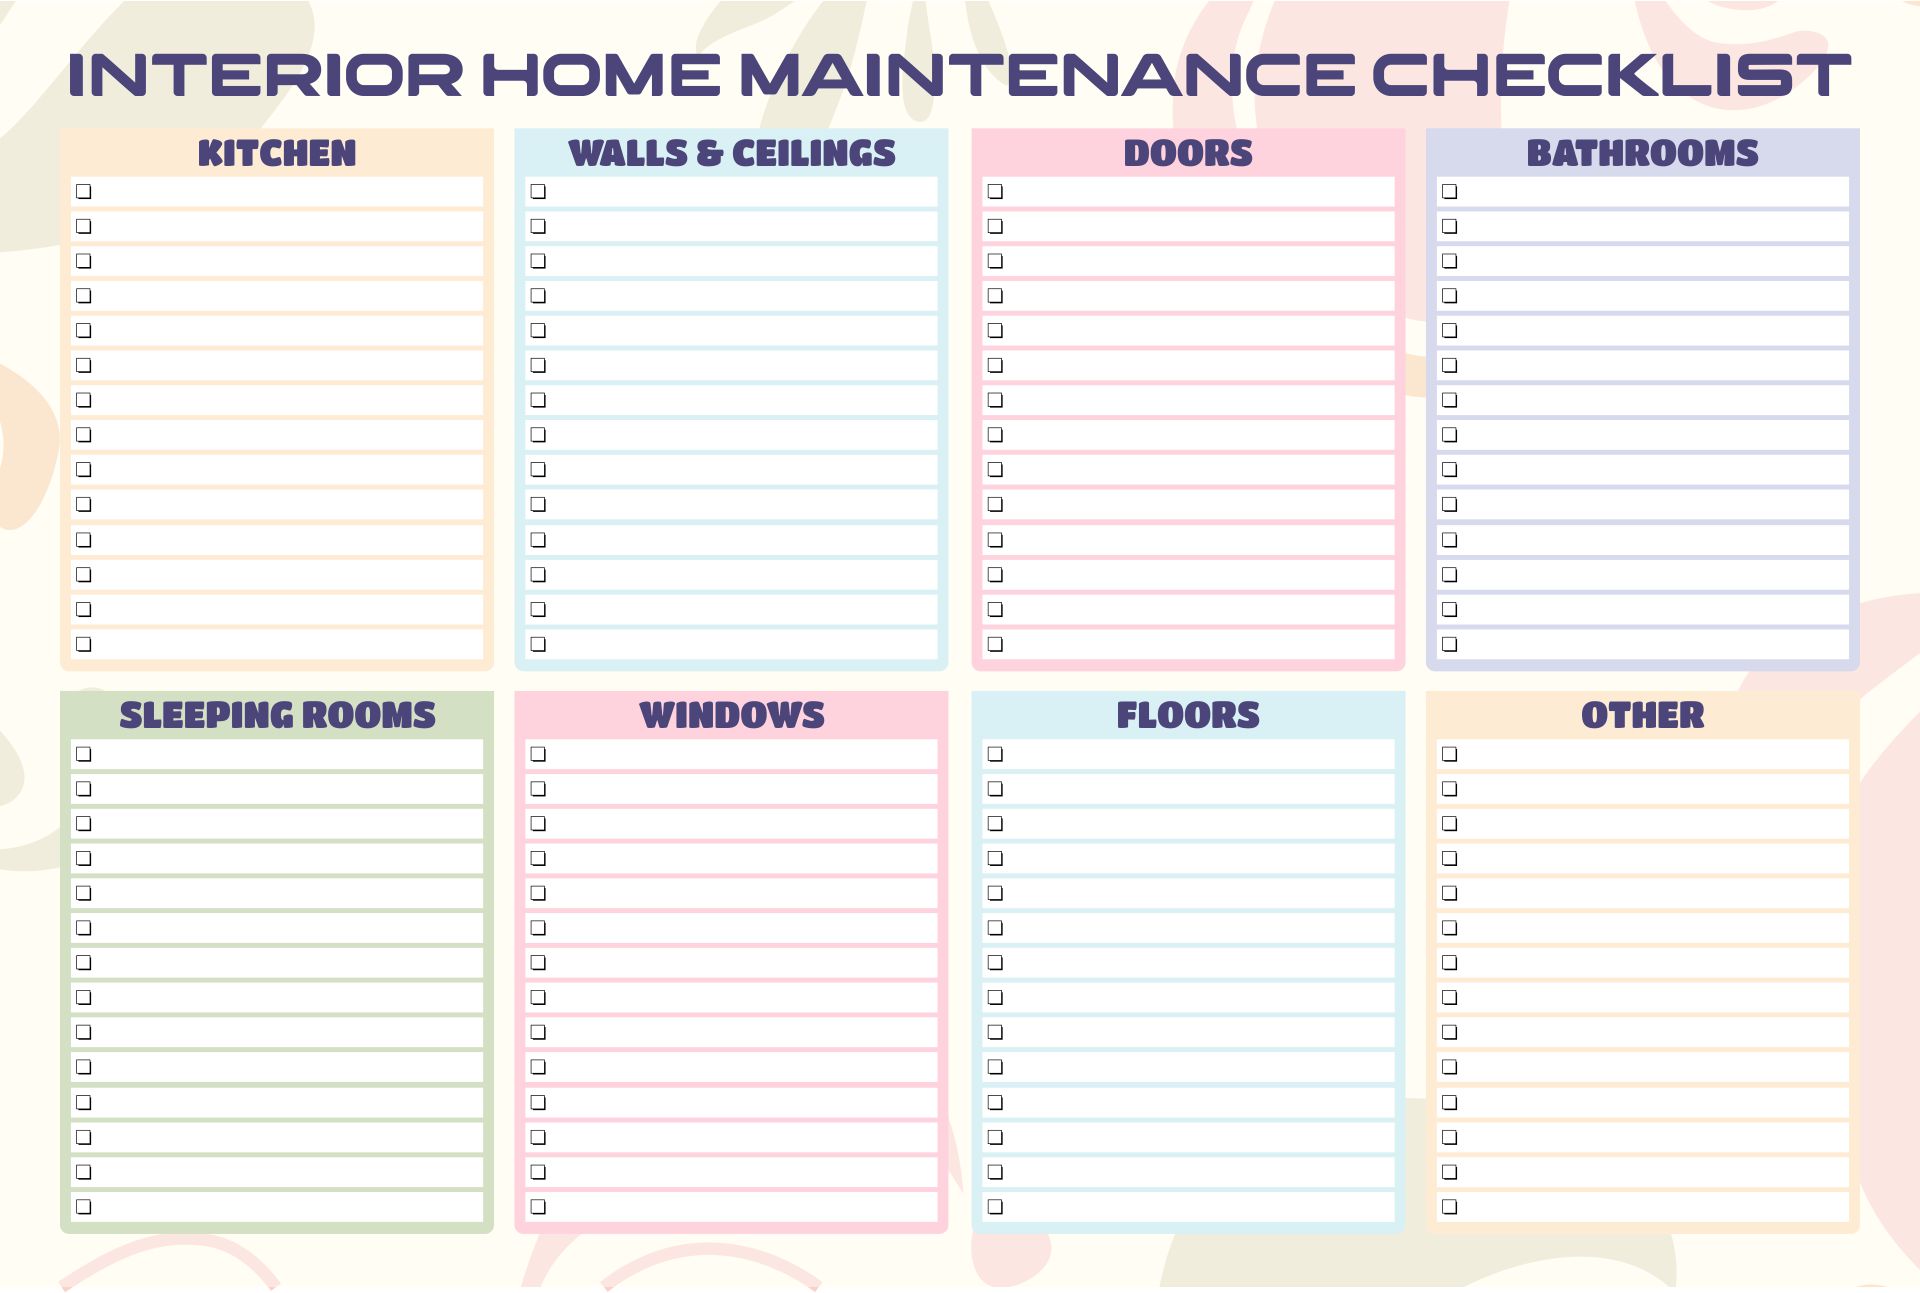 Home Maintenance Checklist – 10 Easy Things to do Monthly